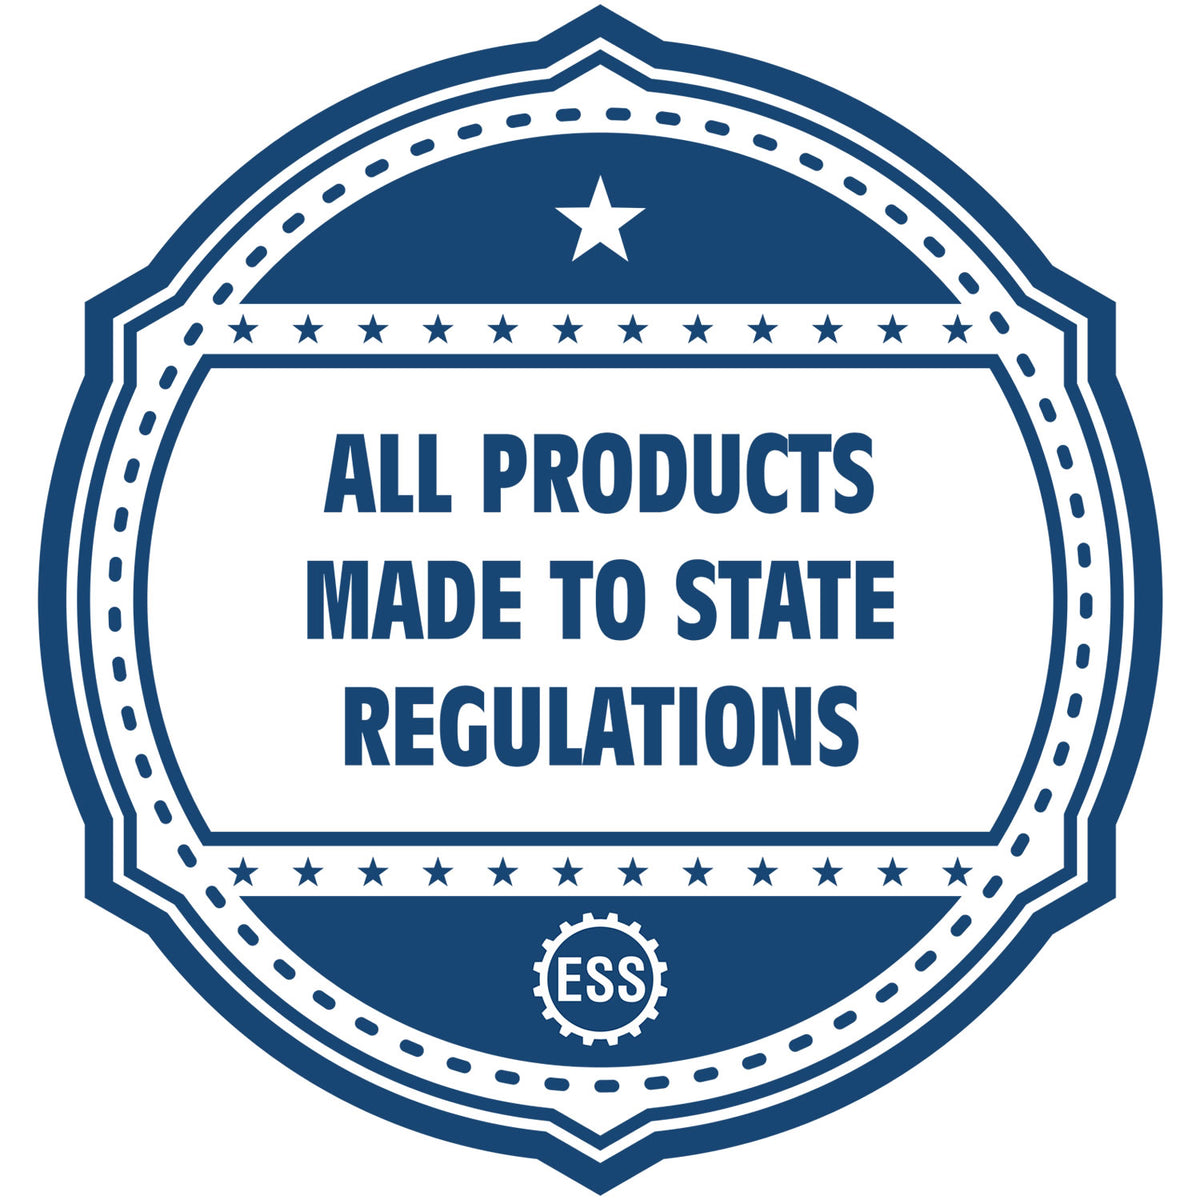 An icon or badge element for the Handheld Michigan Professional Engineer Embosser showing that this product is made in compliance with state regulations.